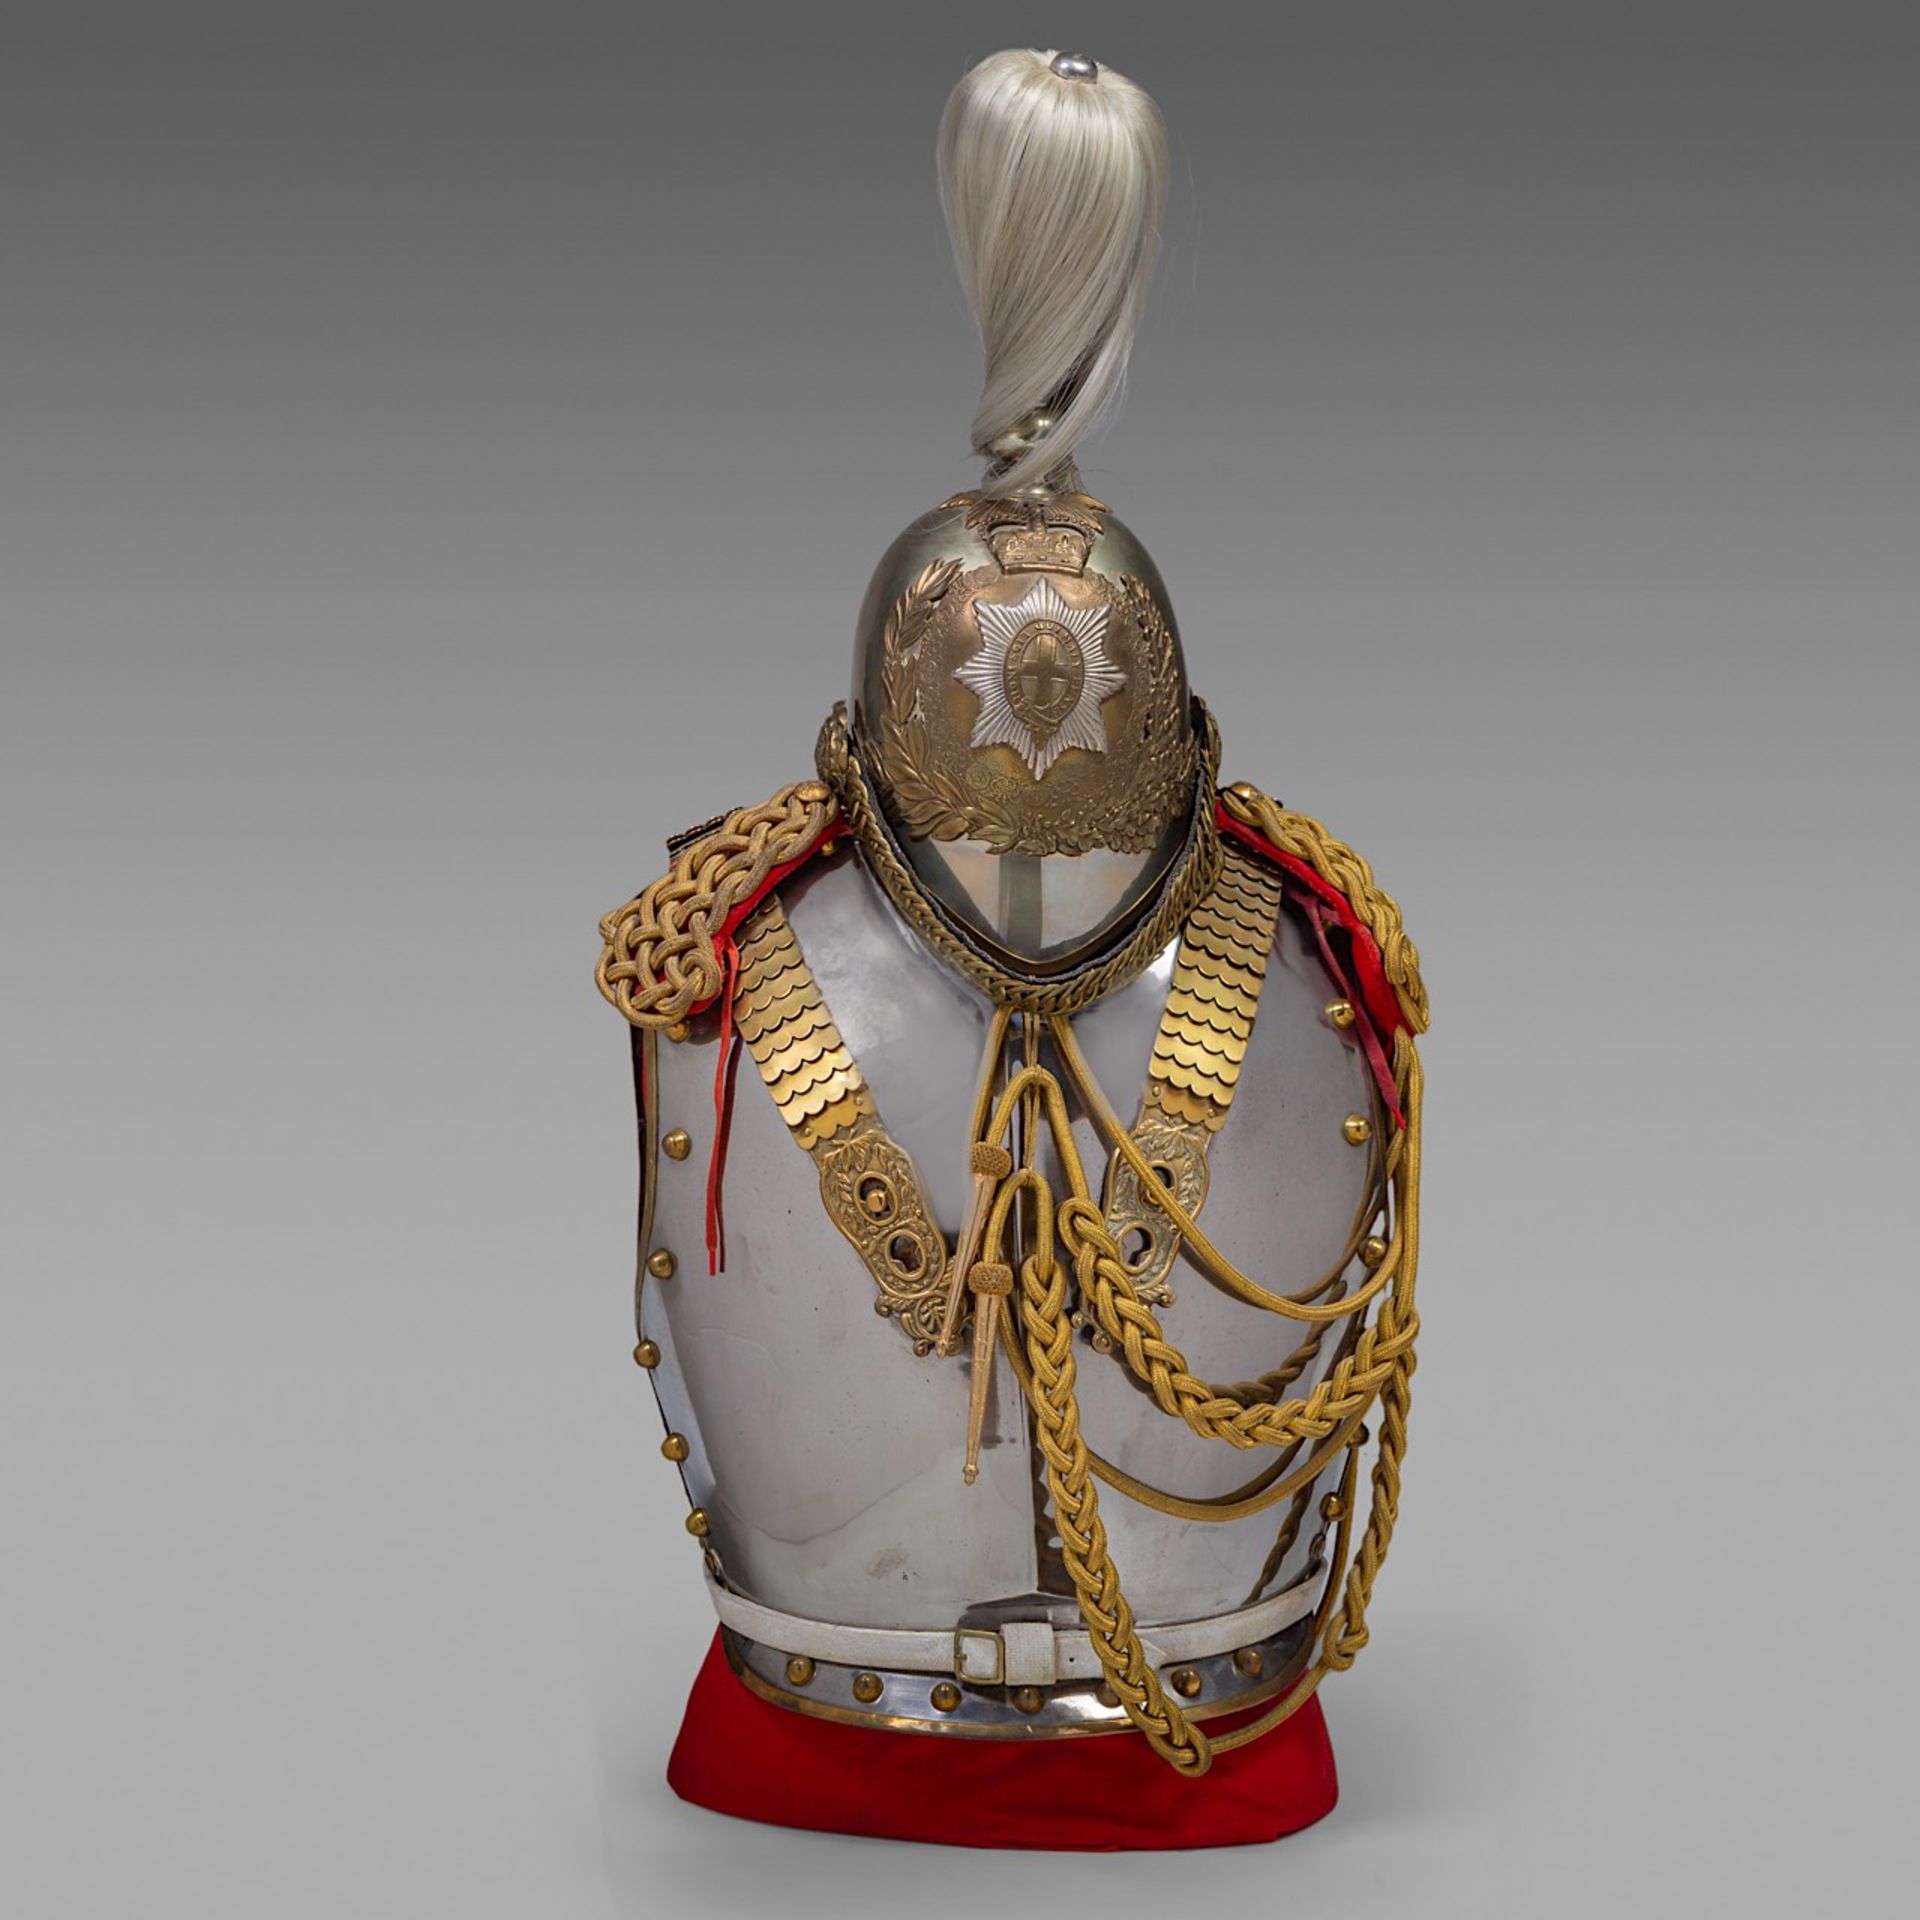 cuirass and helmet of the Royal Horse guards, metal and brass,1952 (Eliabeth II) 88 x 36 x 44 cm. (3 - Bild 2 aus 6